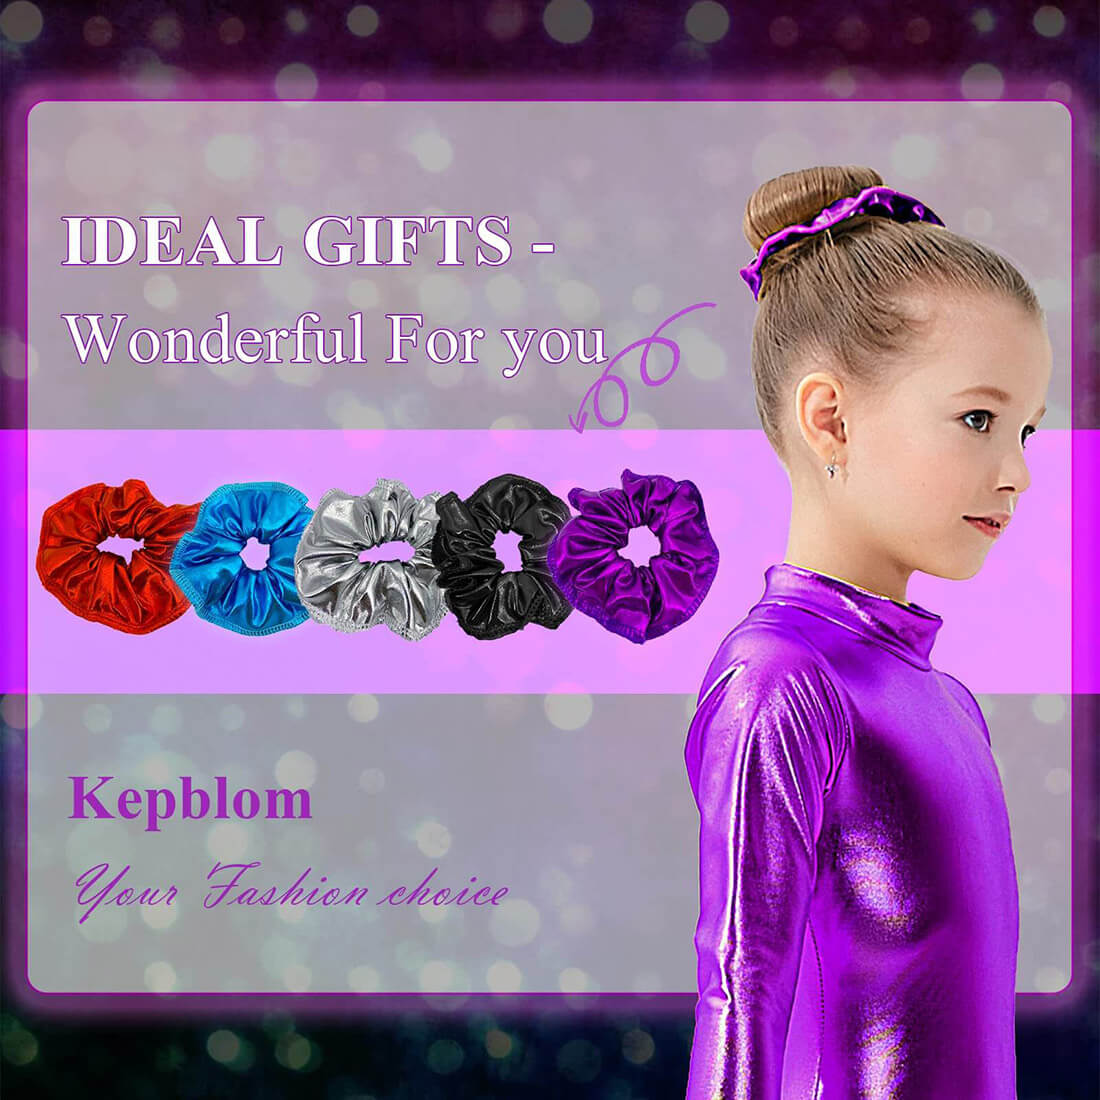 12 Pieces Shiny Metallic Hair Scrunchie Ponytail Holders for Girls